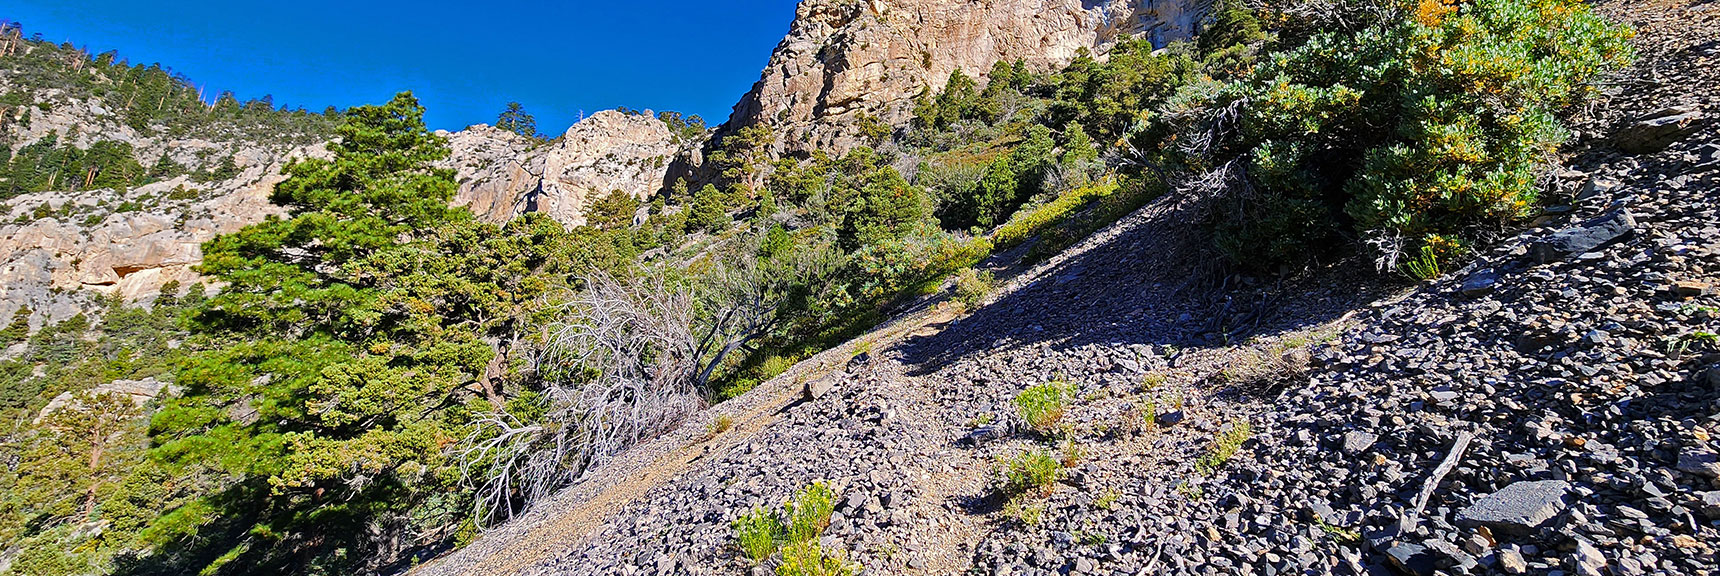 Soon the Trail Becomes Well Defined and Easy to Follow. Gets You Through Cliffs. | Fletcher Canyon / Fletcher Peak / Cockscomb Ridge Circuit | Mt. Charleston Wilderness | Spring Mountains, Nevada